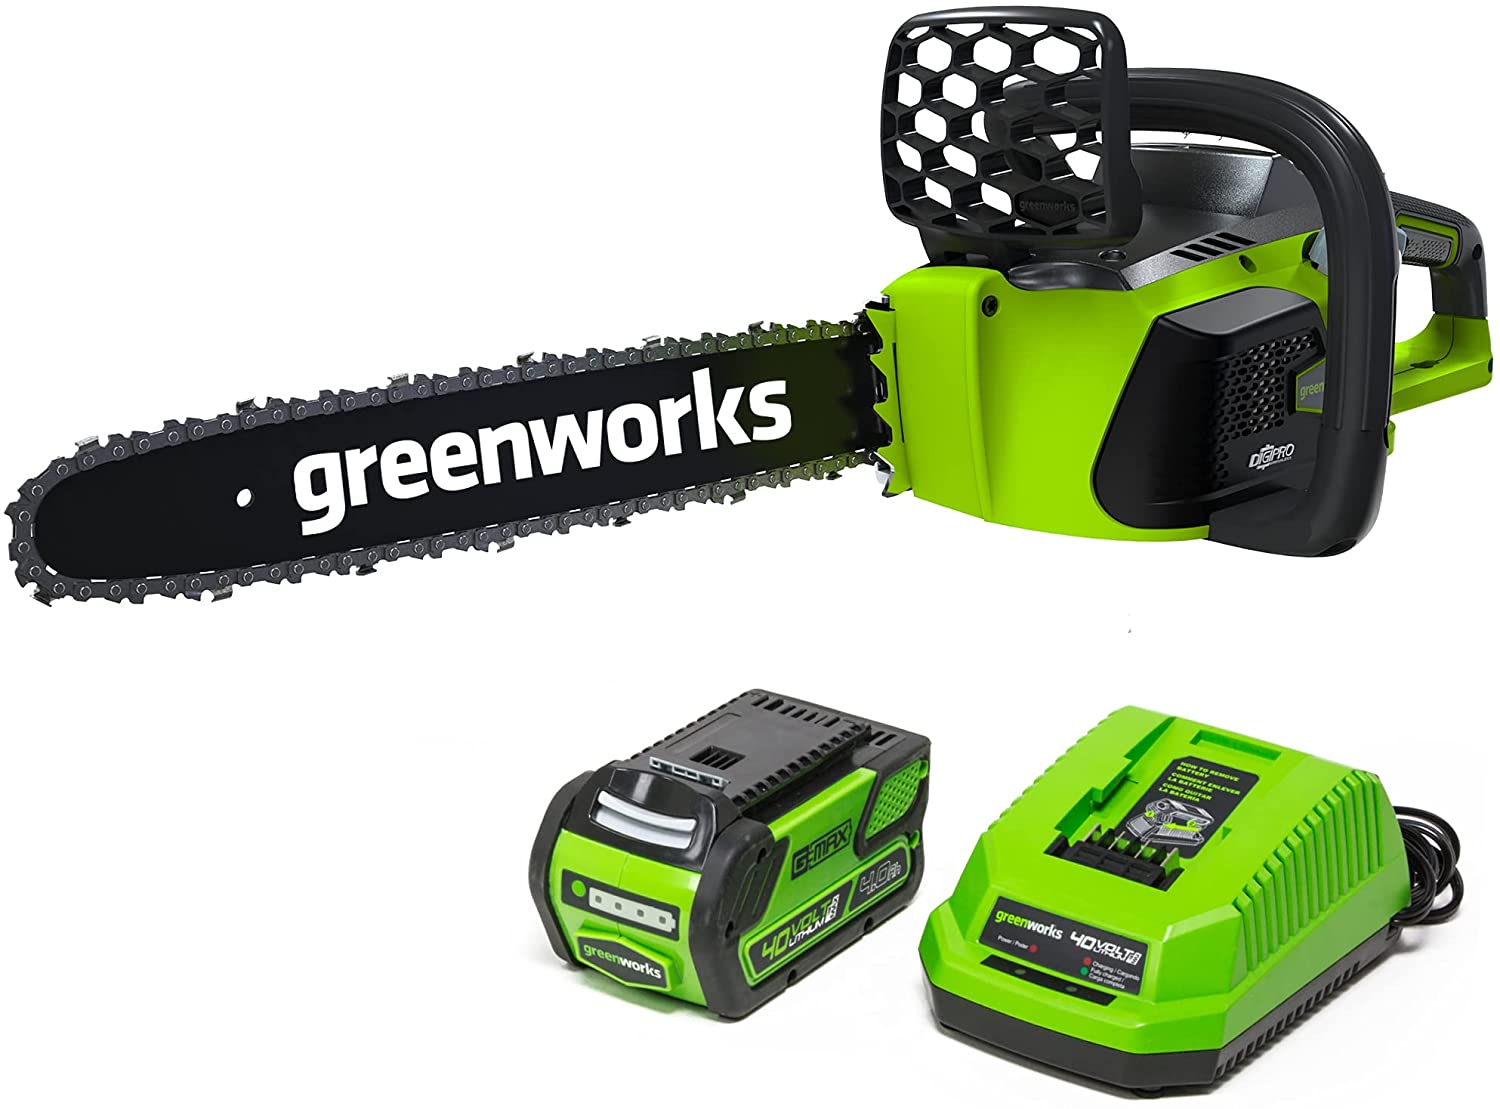 16" Greenworks 40V Brushless Cordless Chainsaw w/ 4.0Ah Battery and Charger $100 + Free Shipping